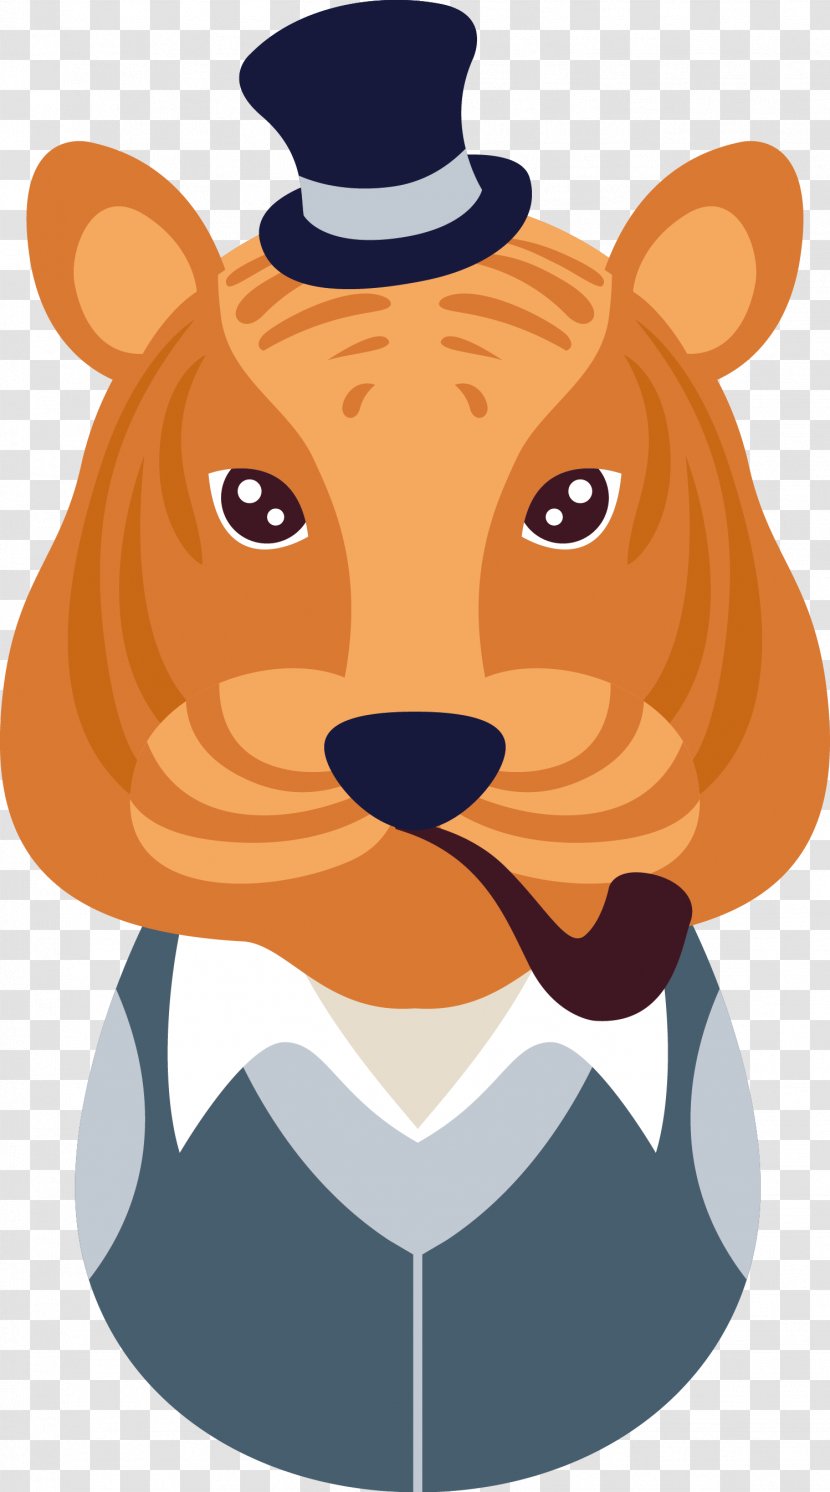 Tiger Whiskers Dog Illustration - Cartoon - Creative Puppy Vector Transparent PNG